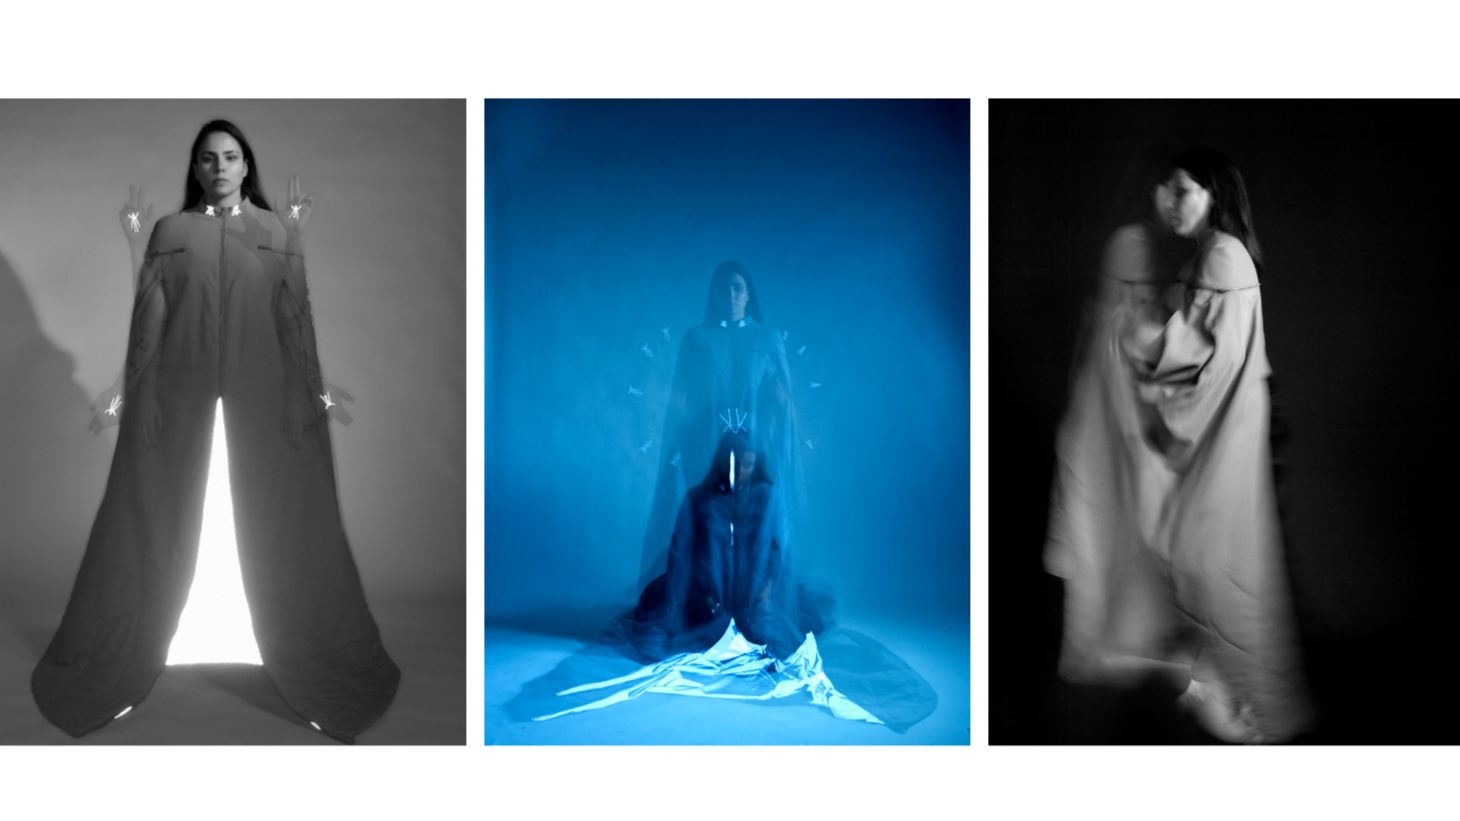 Layered photographs of a woman standing and sitting wearing long draping clothing.